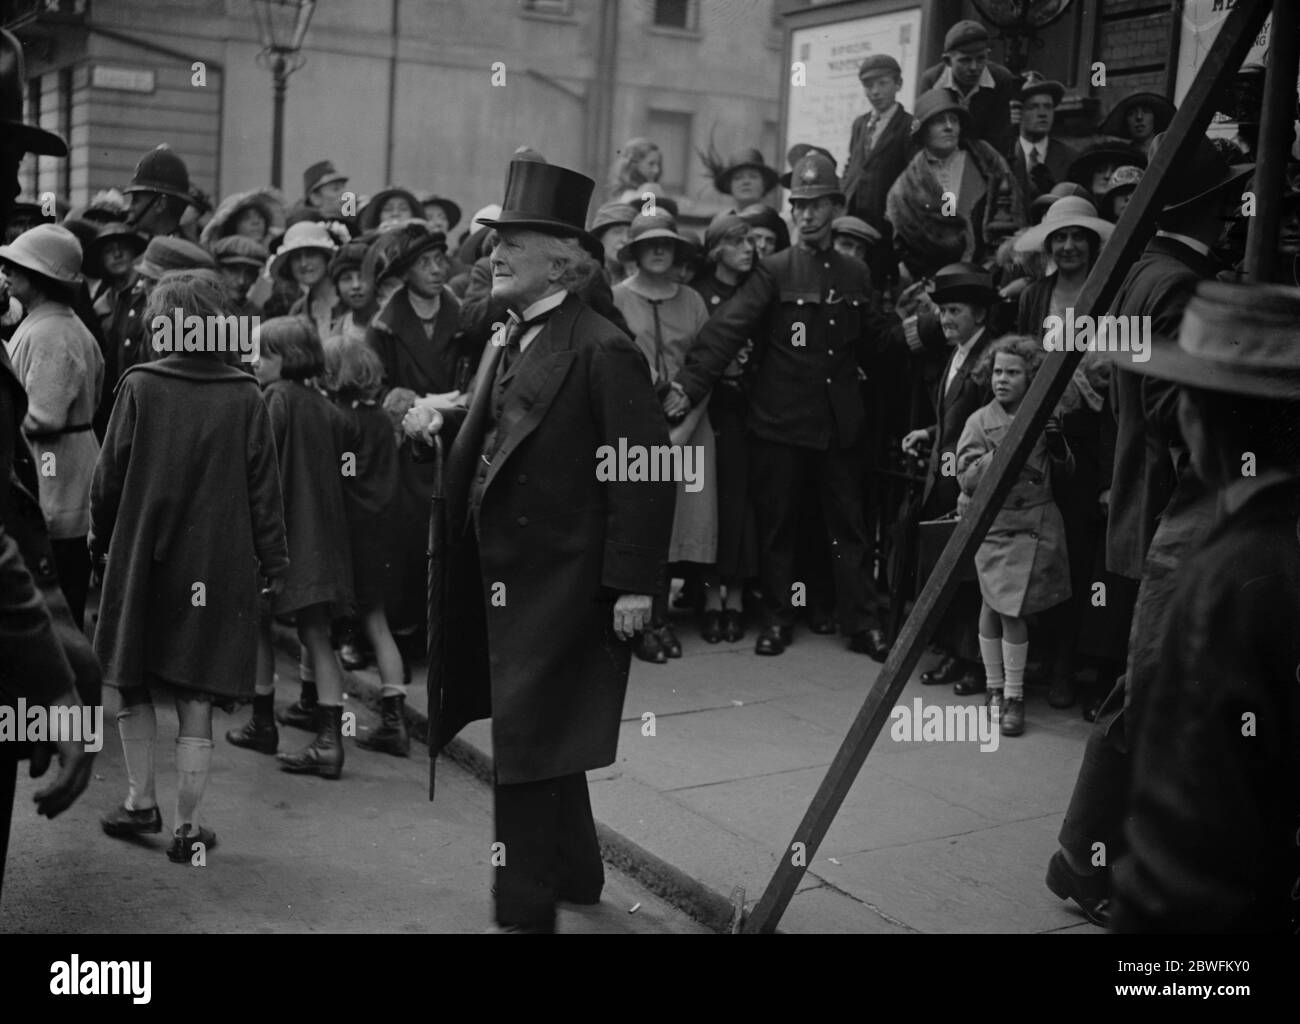 Wedding . Miss Eleanor Henderson , daughter of the Home Secretary , Mr Arthur Henderson and Mr P S Gledhill were married at the Wesleyan Church , Hinde Street , Manchester Square . Lord Parmoor leaving the church . 31 July 1924 Stock Photo